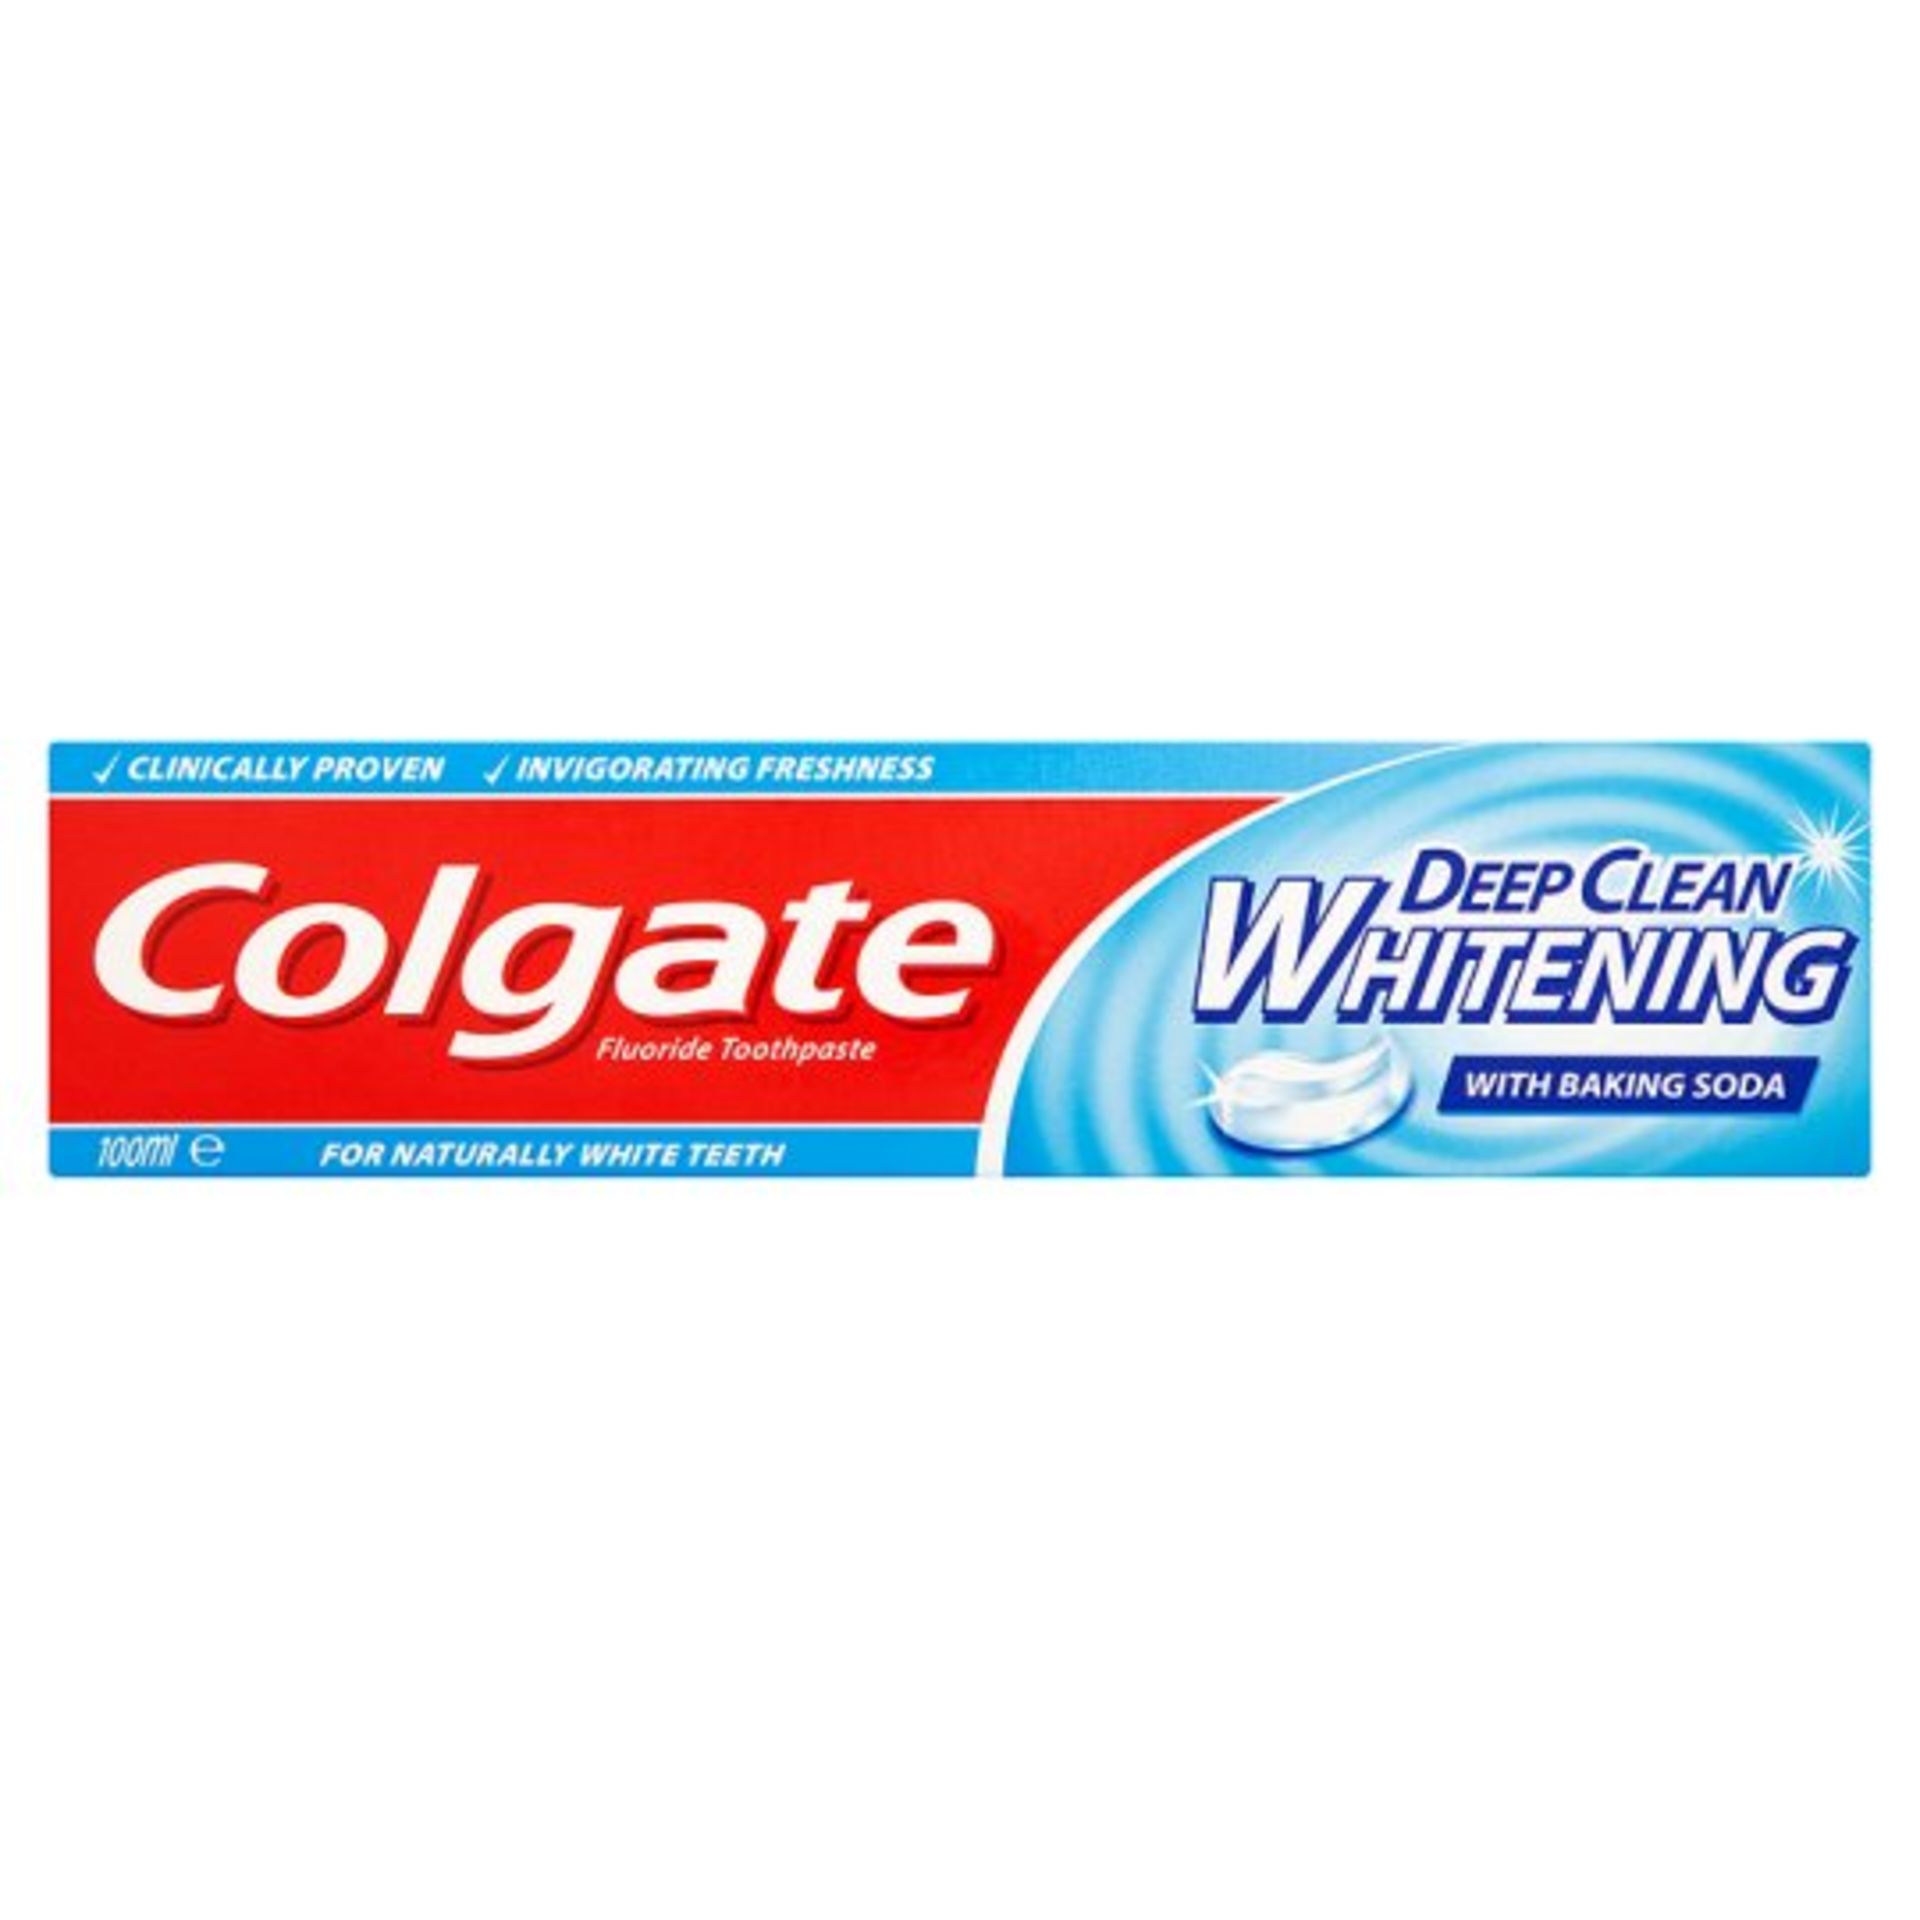 V Brand New 12 x Colgate Toothpaste Deep Clean Whitening 100ml Total Superdrug Price £12.38 - Image 2 of 2